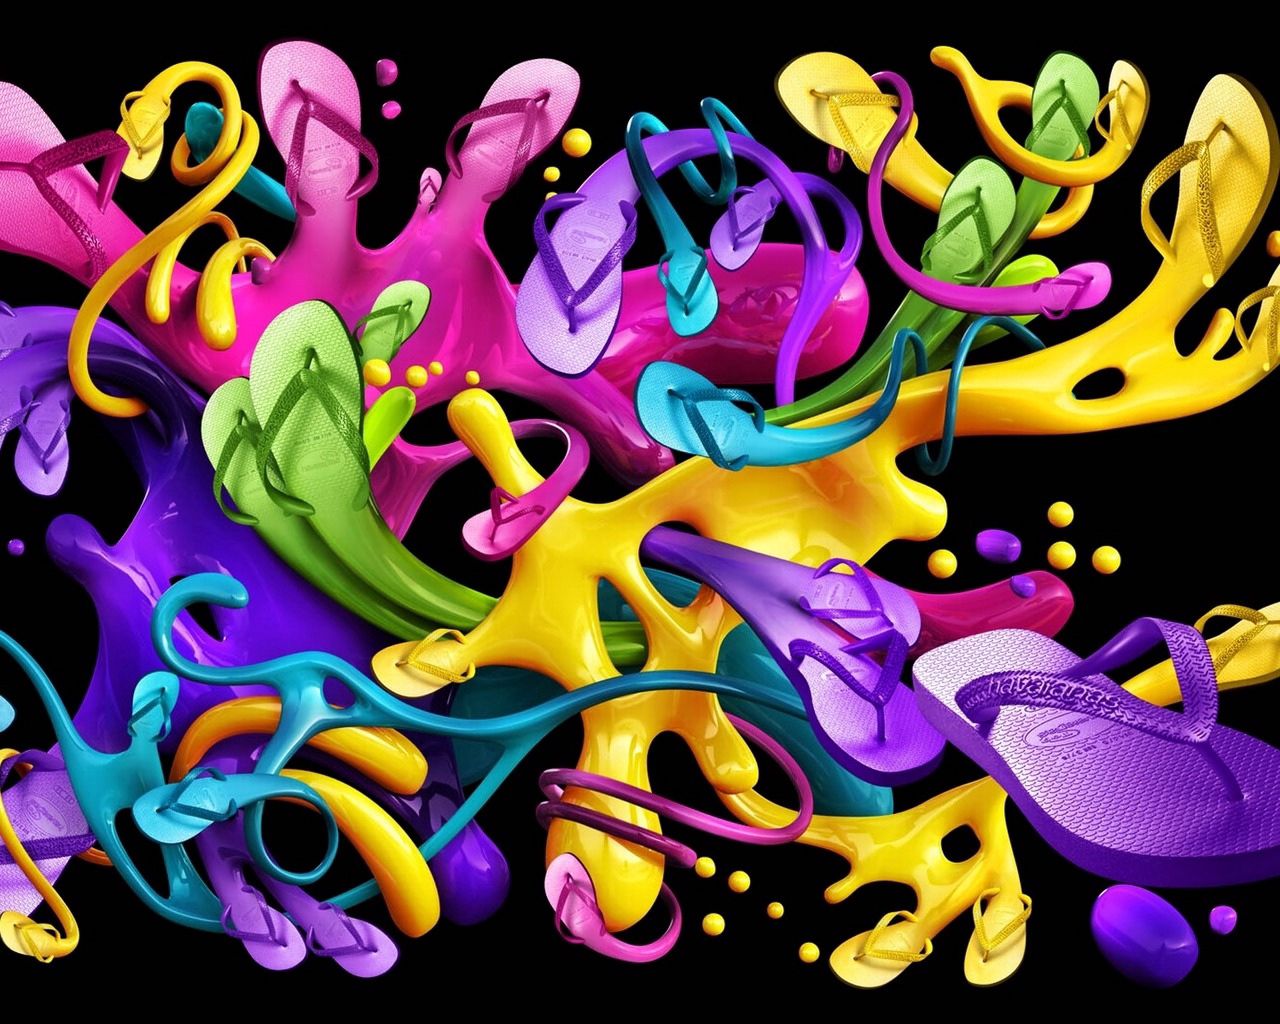 motley, abstract, bright, multicolored, picture, drawing, marco UHD